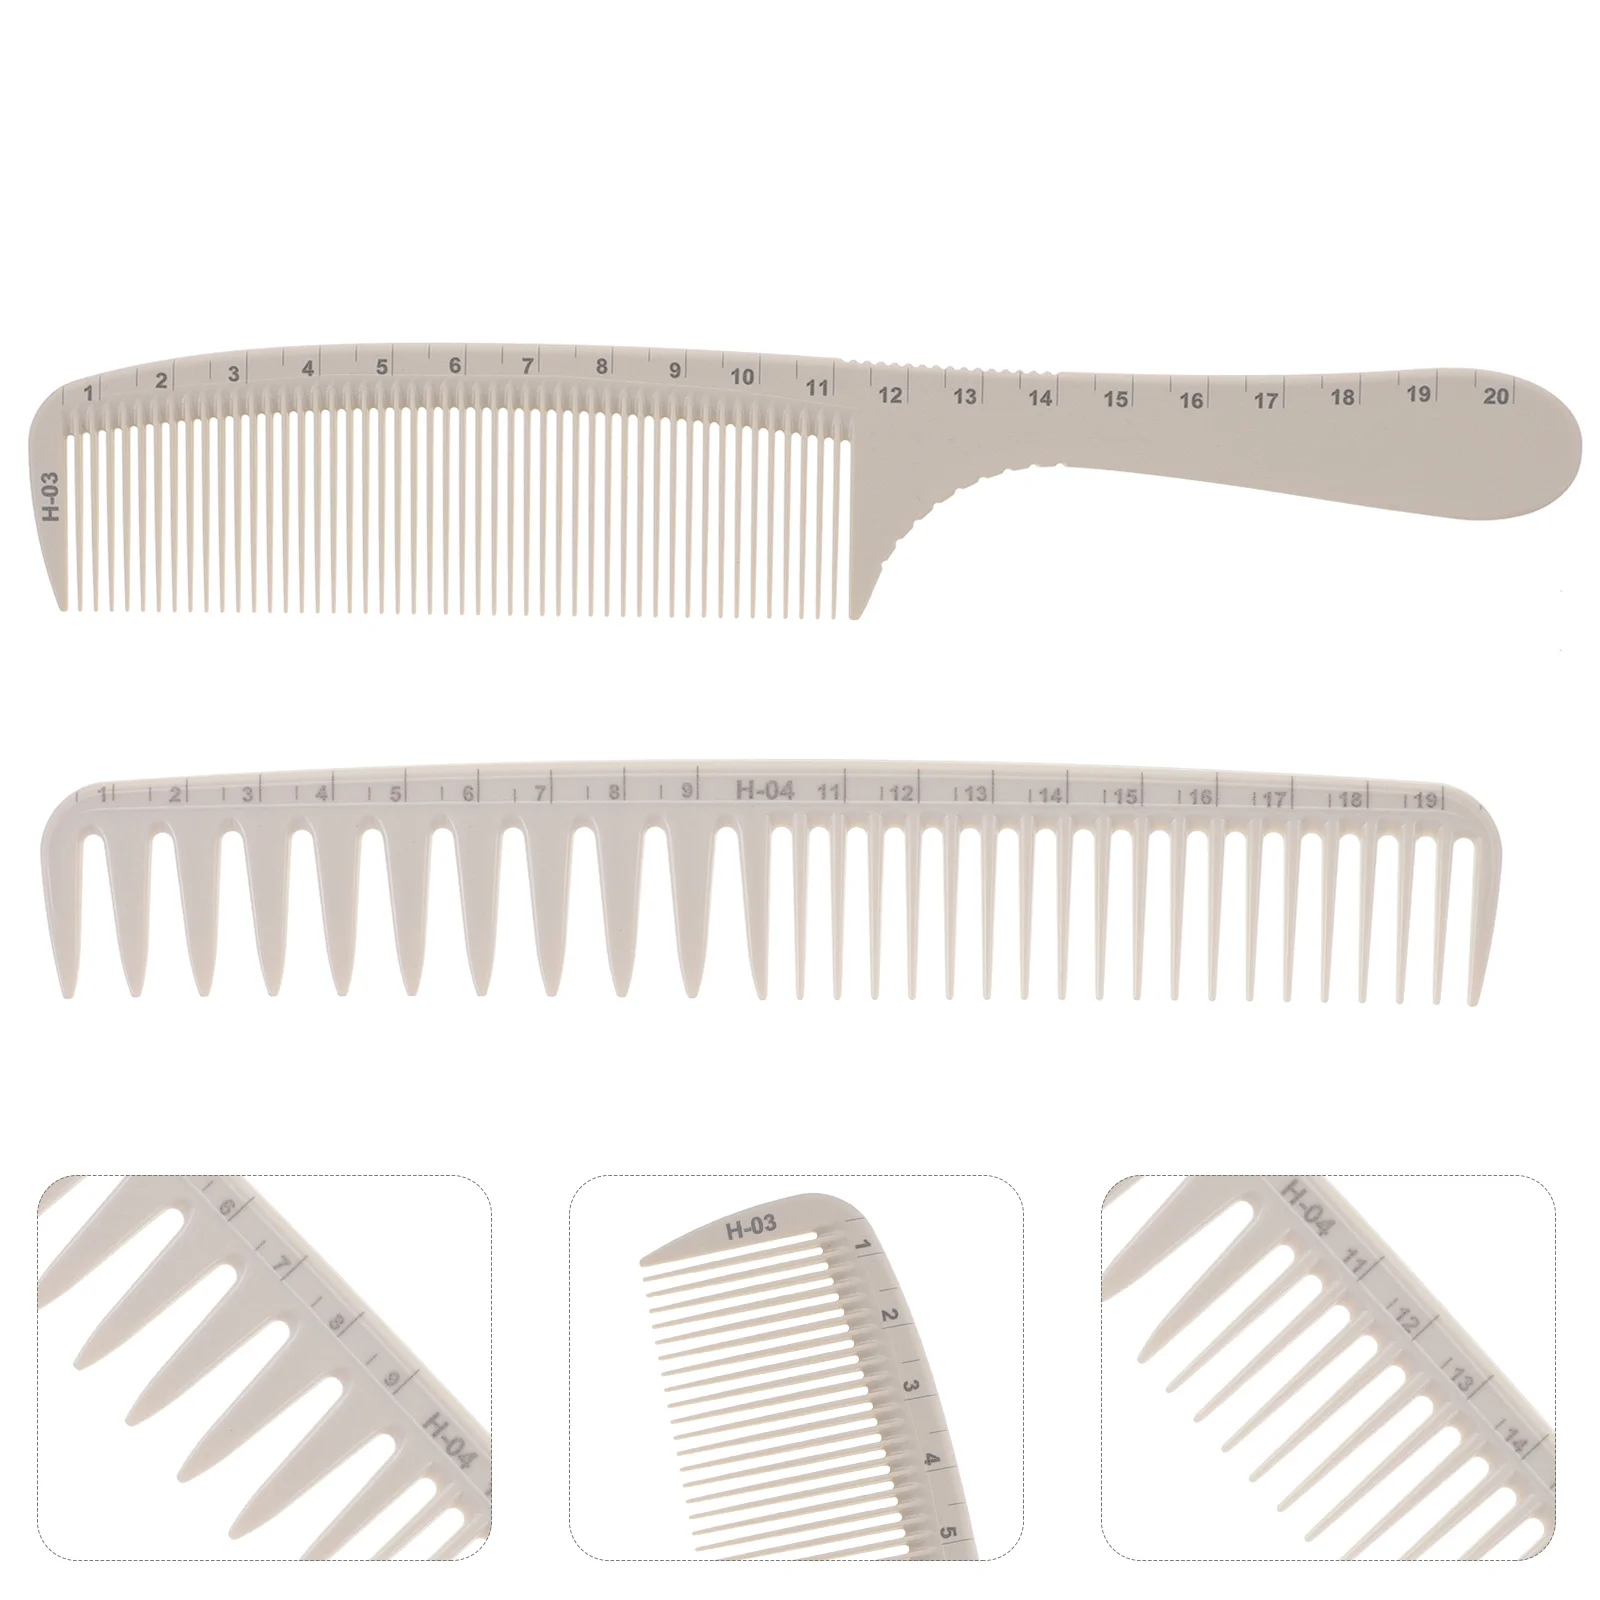 

Graduated Hair Comb Braiding Parting Combs Ruler Wide Barber Professional Cutting Flat Ironing Travel